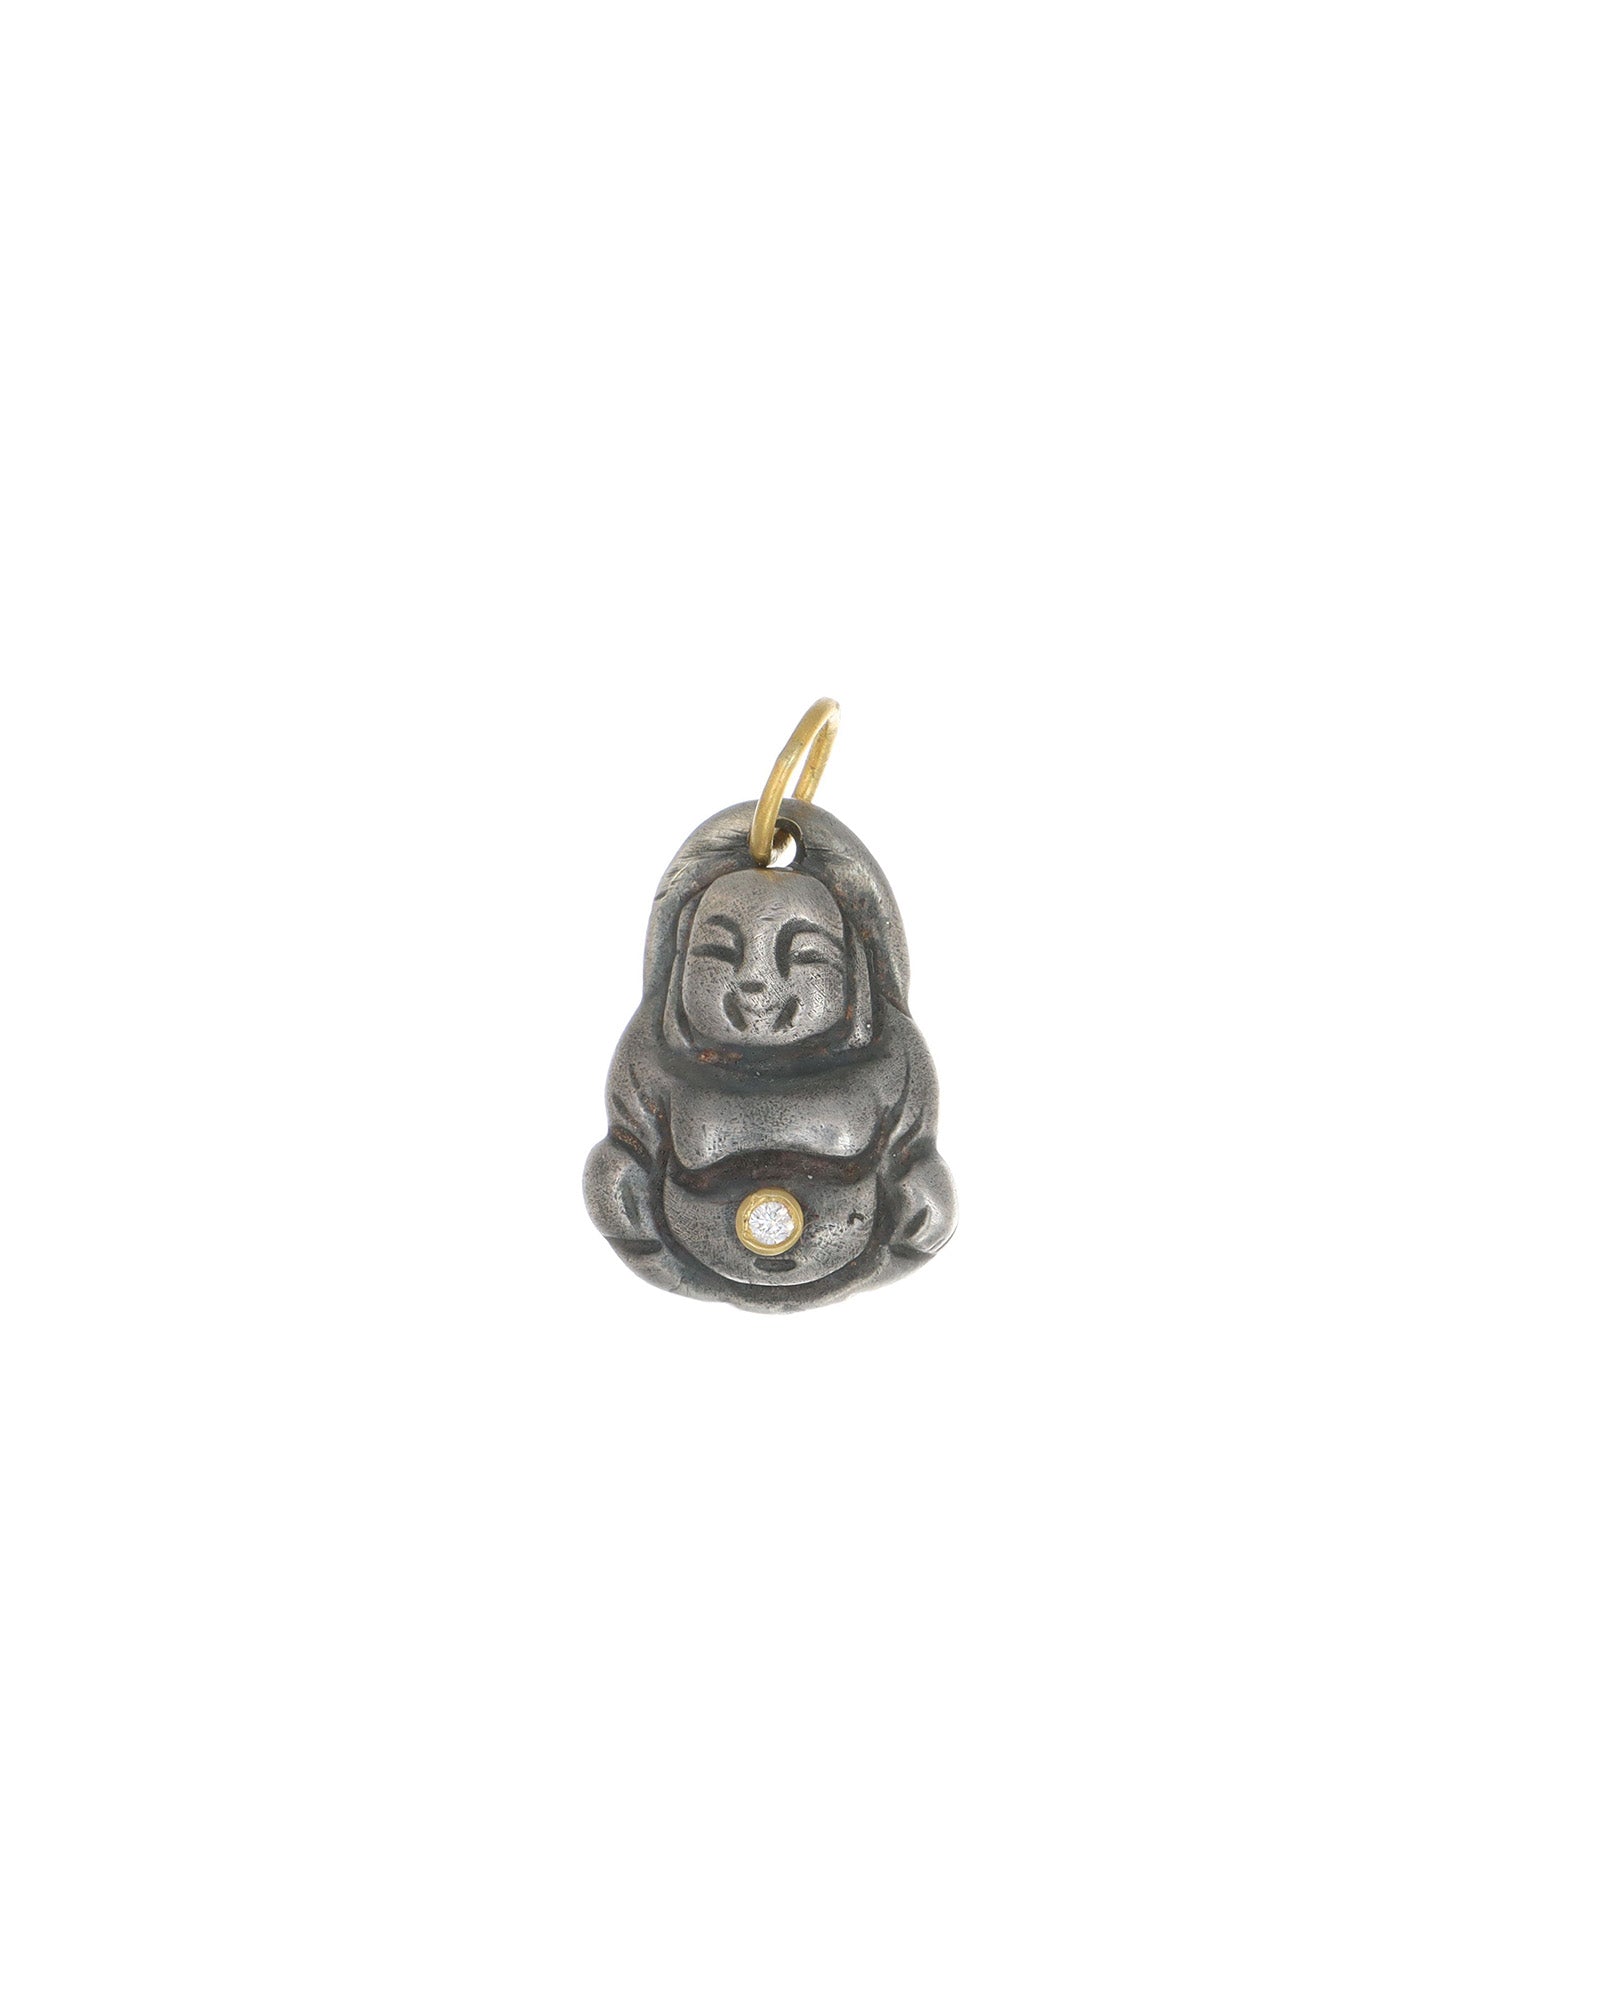 Gold and Silver Buddha Pendant